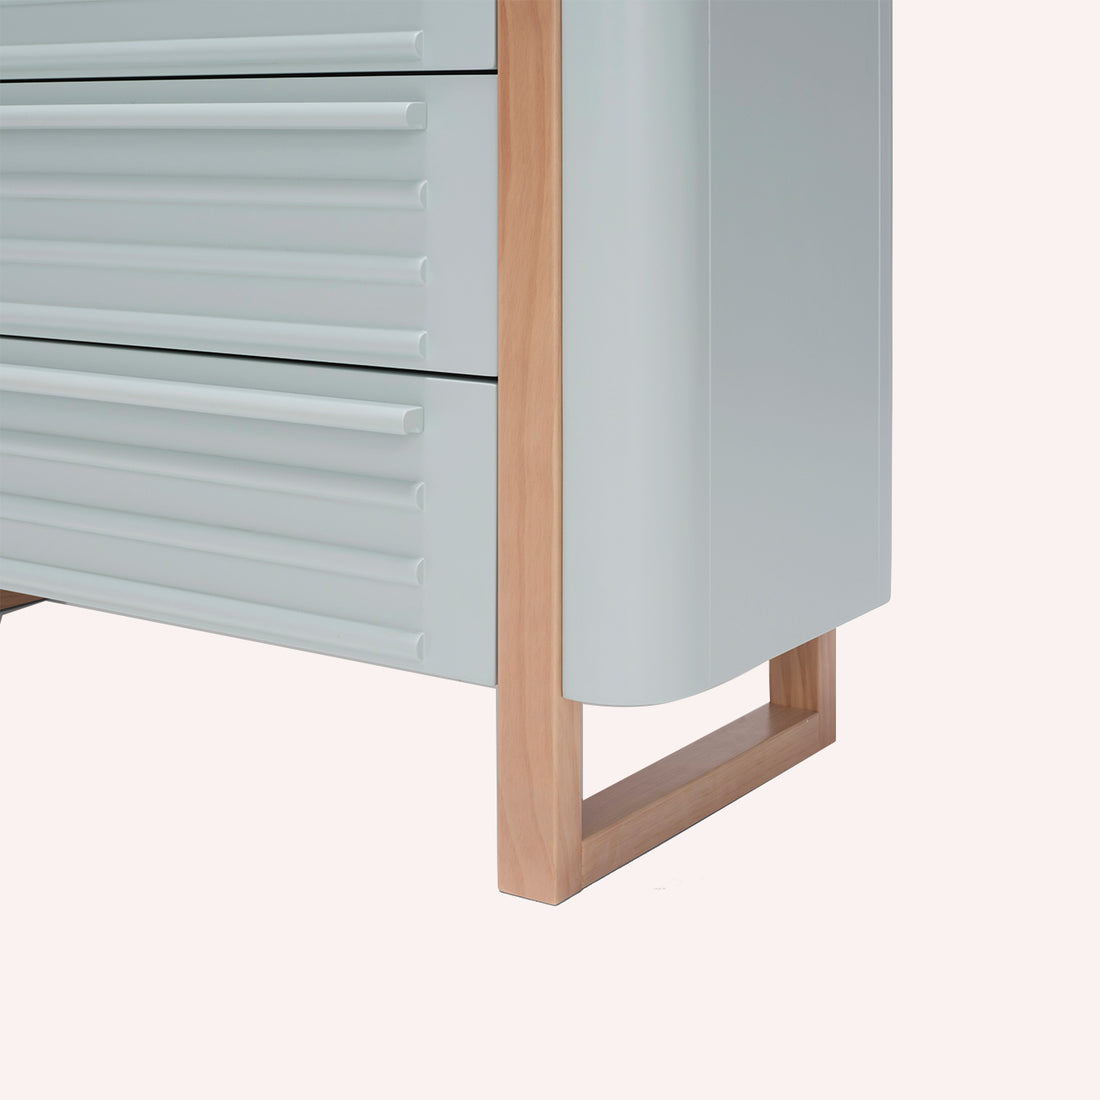 Pisa Drawer Chest - Green and Sandstone